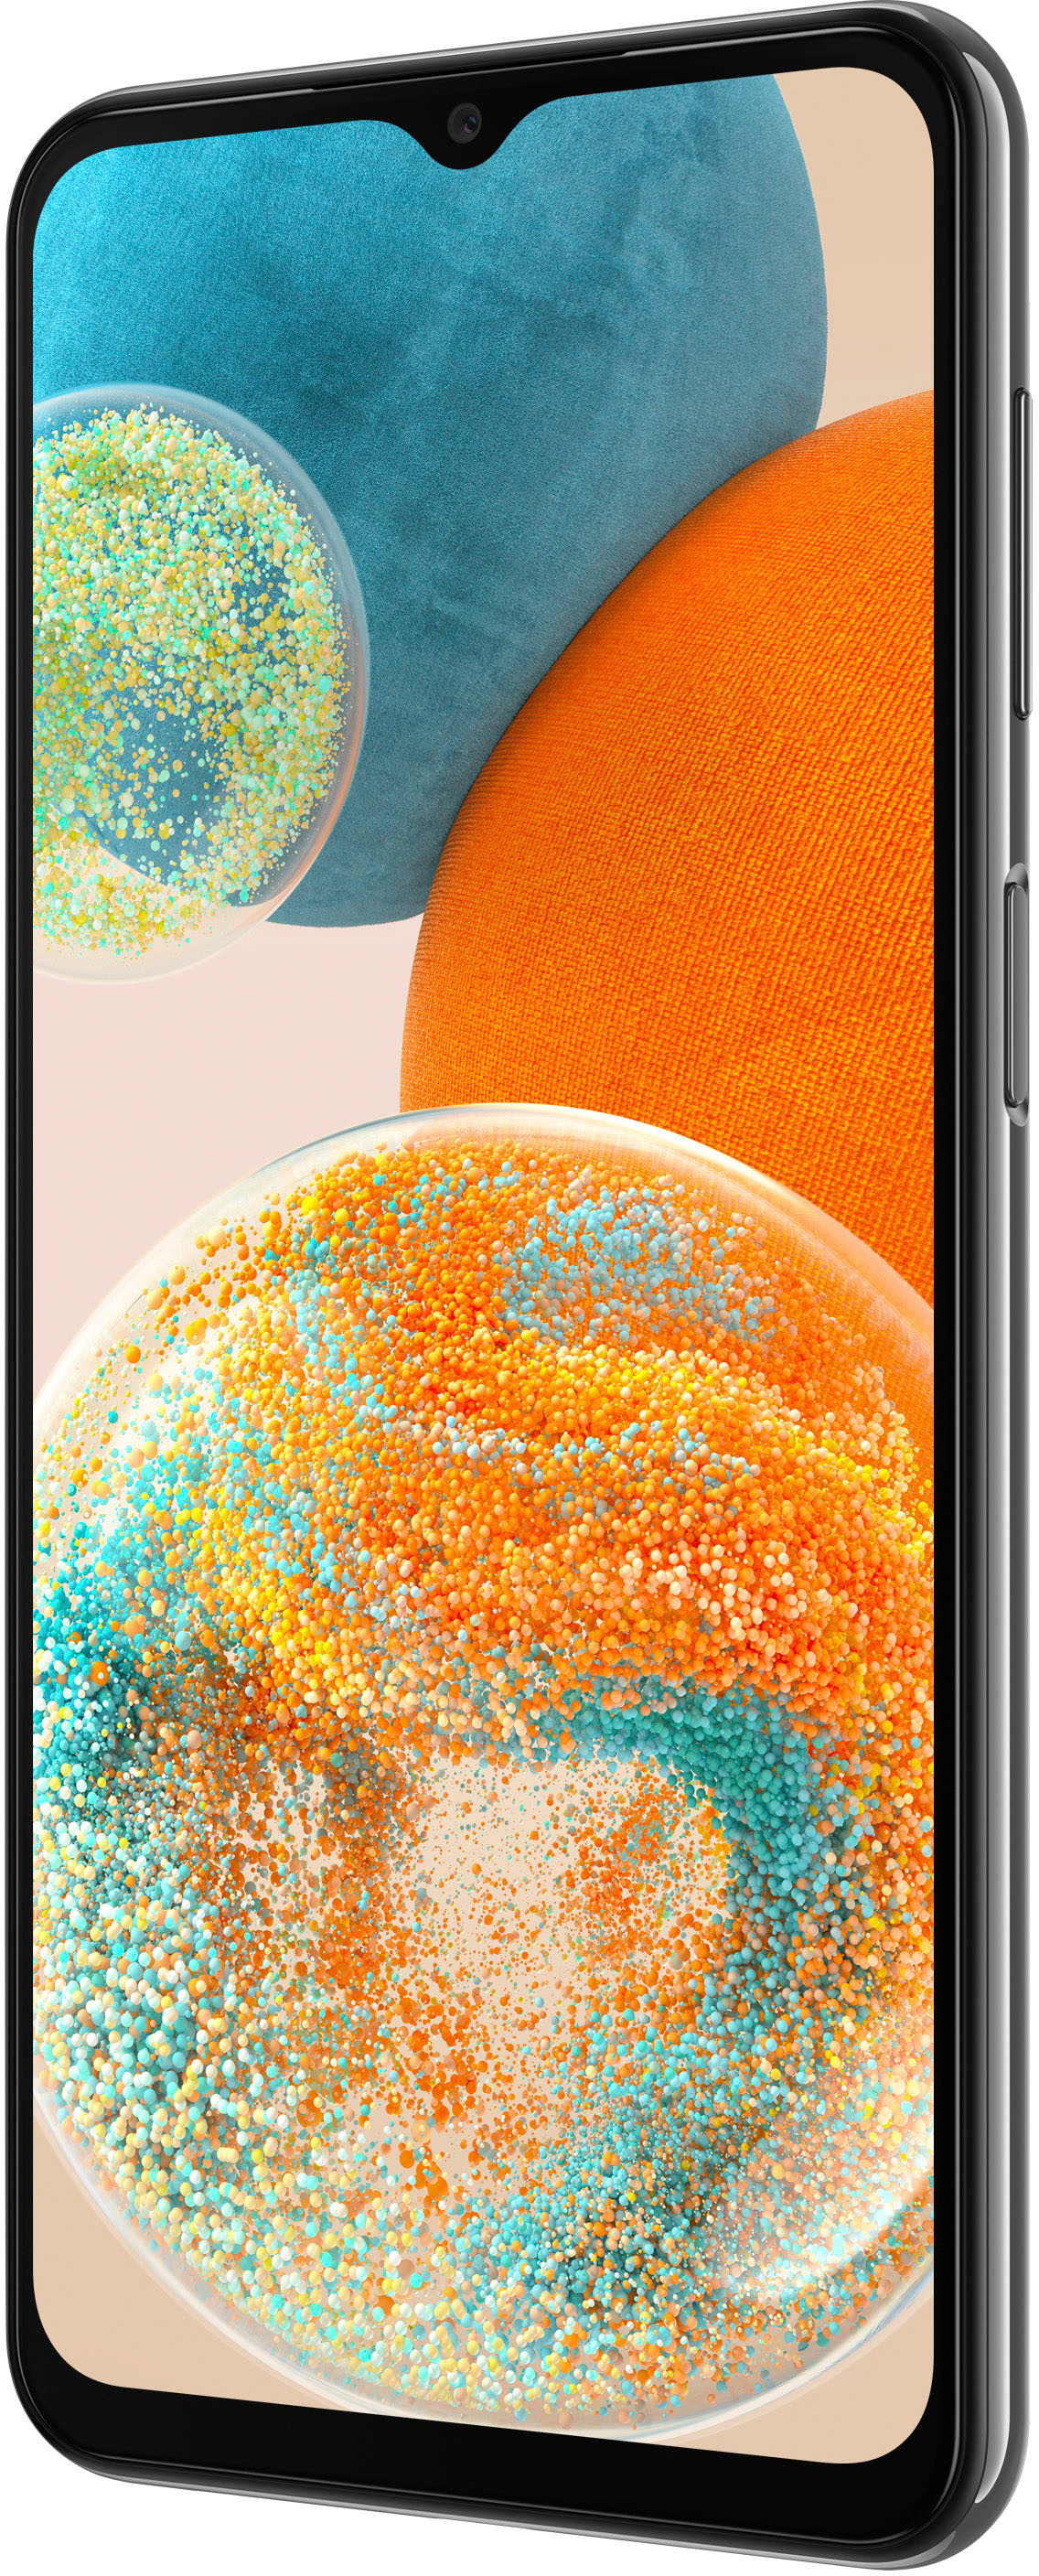 Galaxy A32 5G, Features & Specs